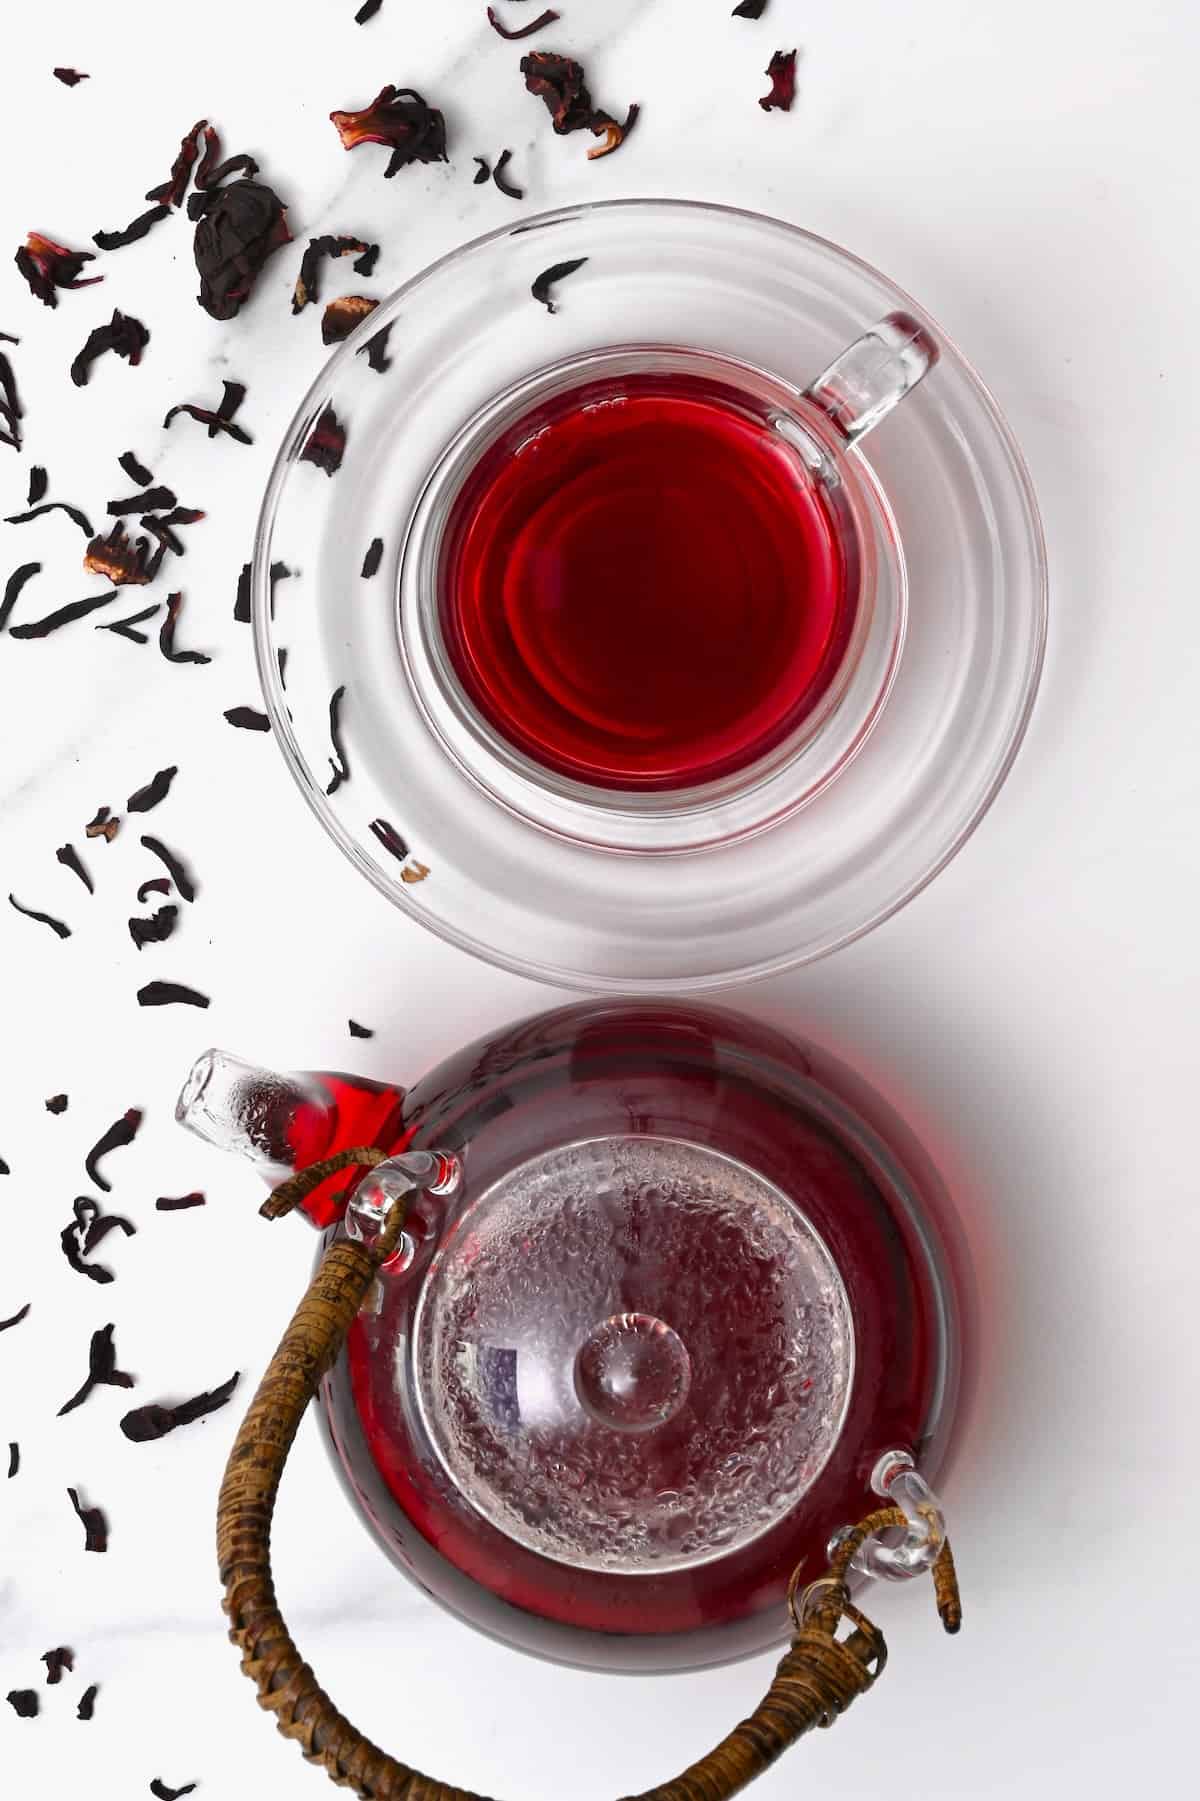 Top view of a kettle and cup with hibiscus tea